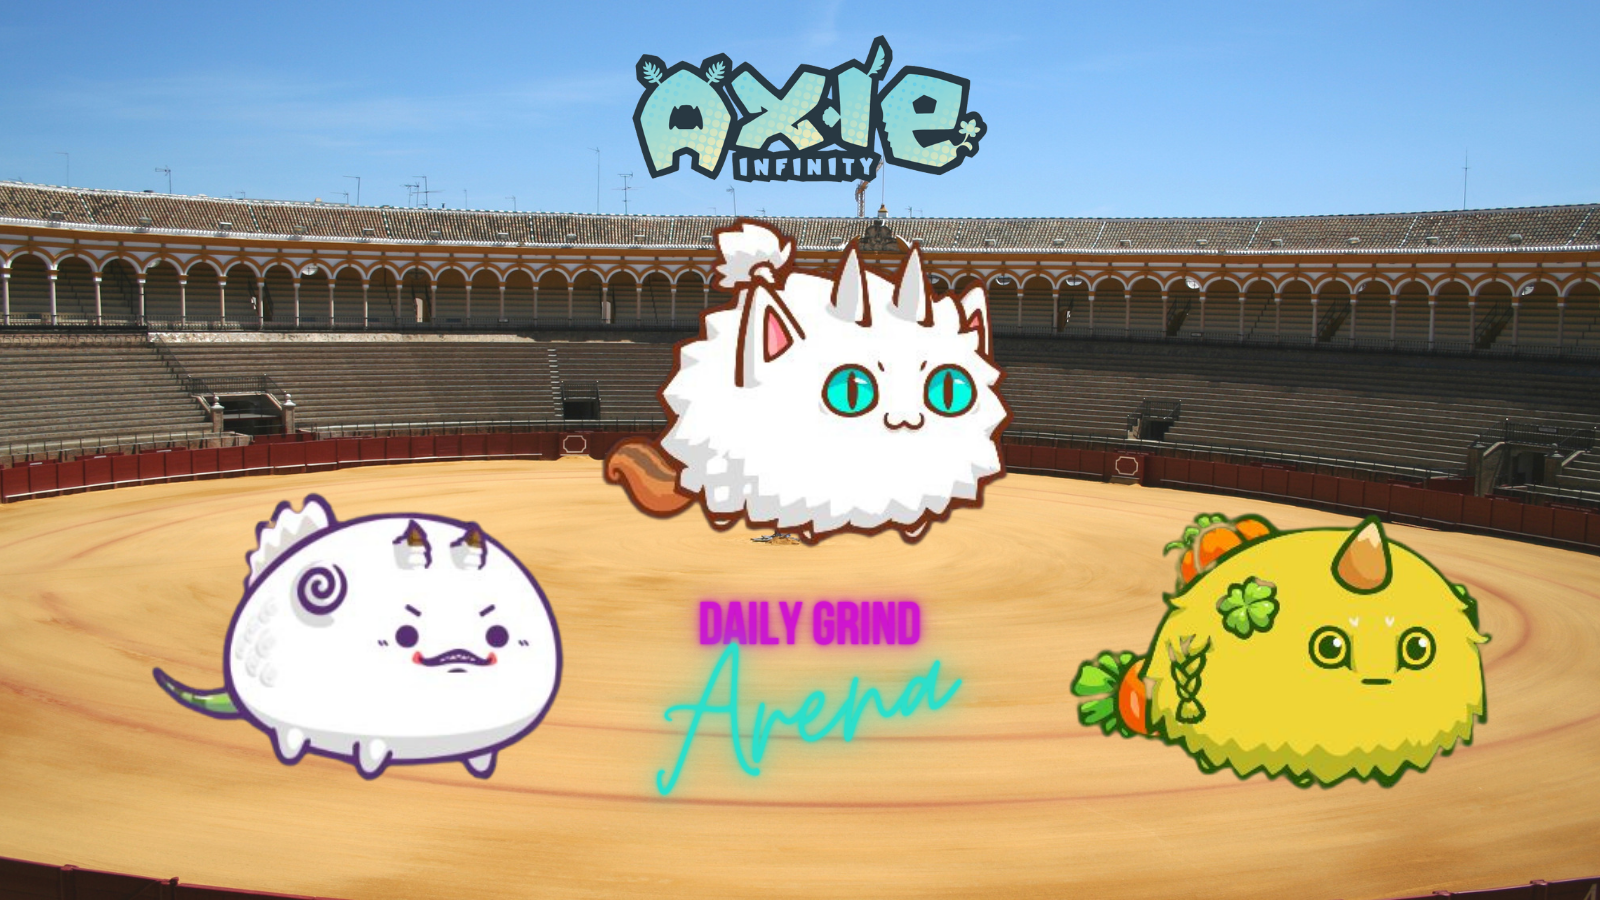 AXIE.png